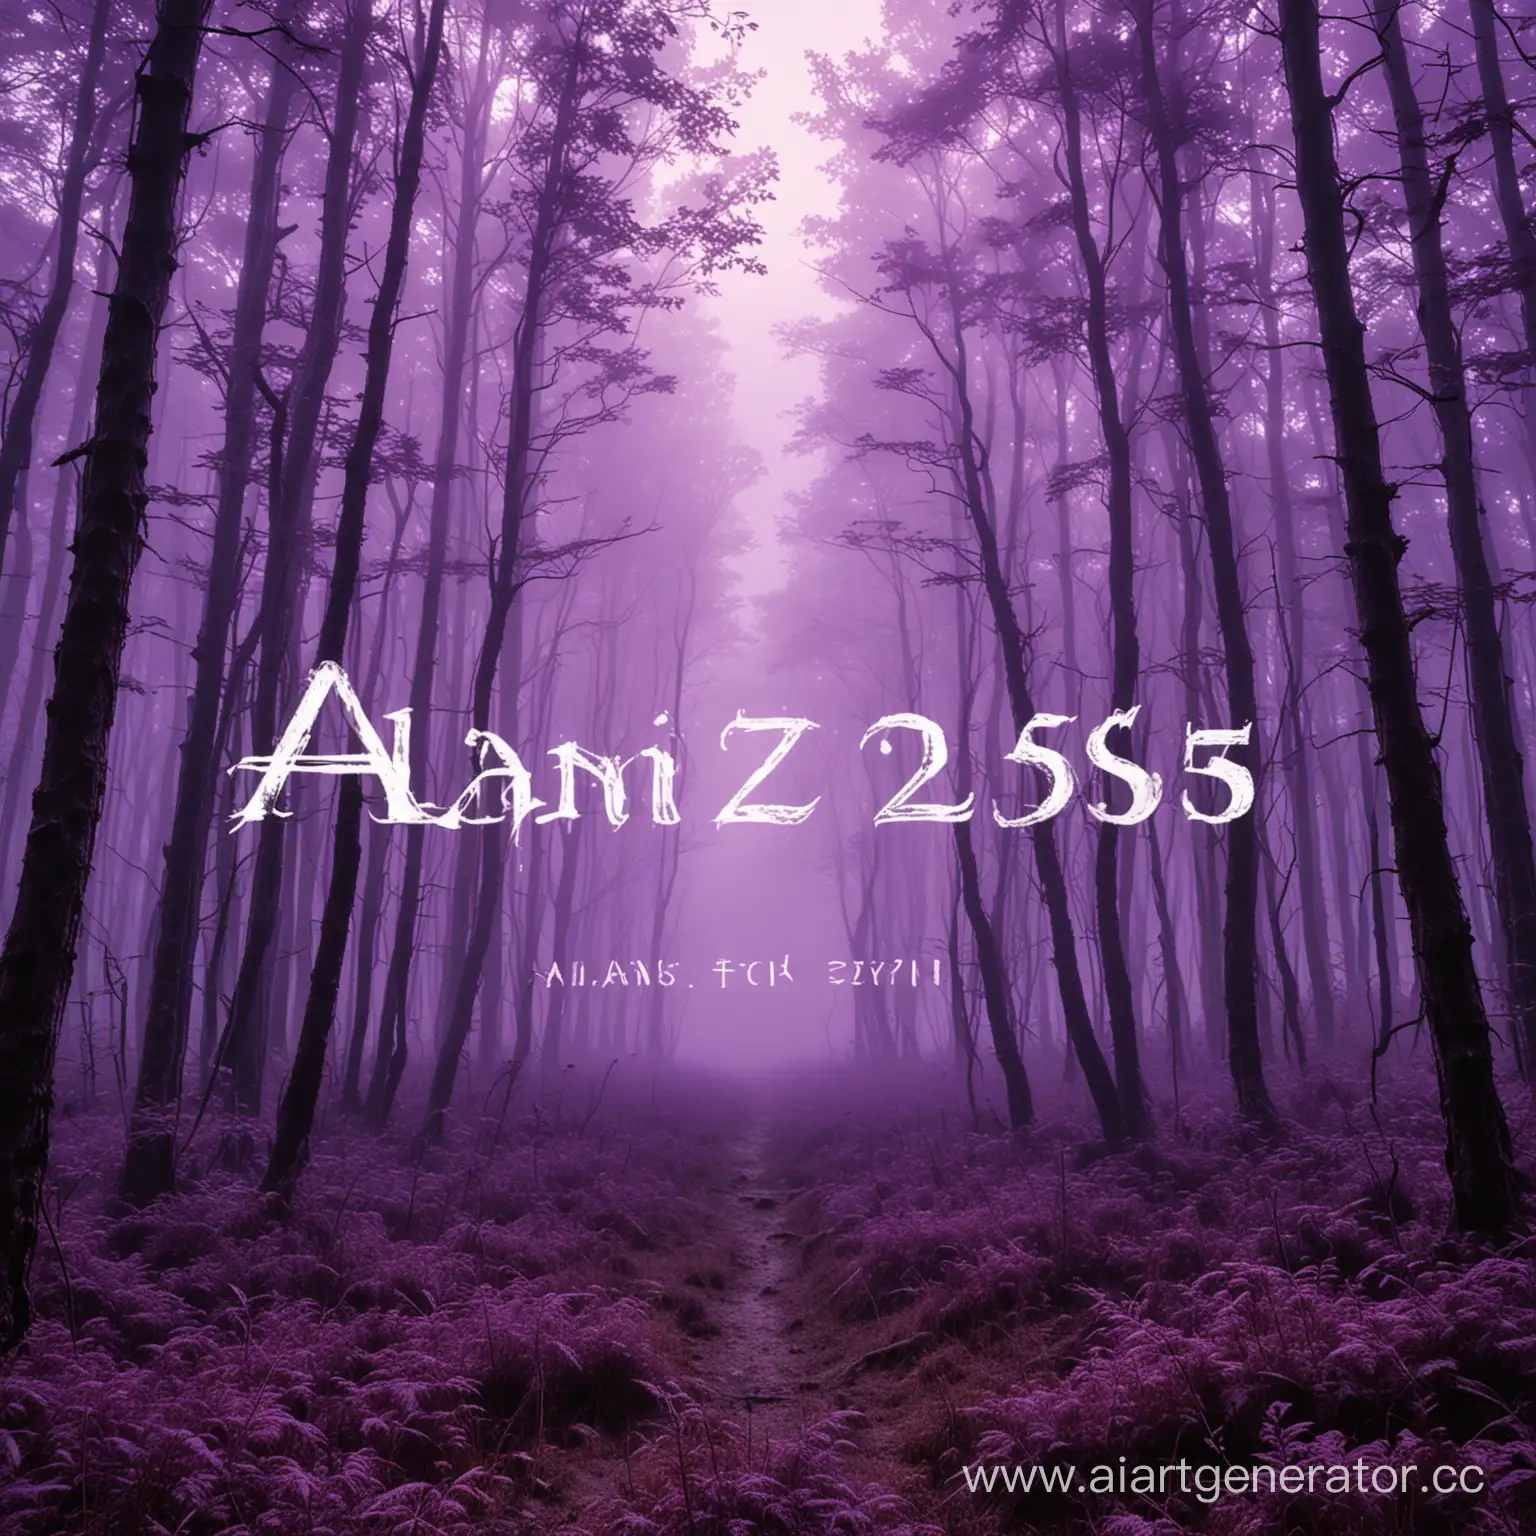 Enigmatic-Dark-Purple-Forest-with-Mystical-Mist-and-ALANZ2559-Text